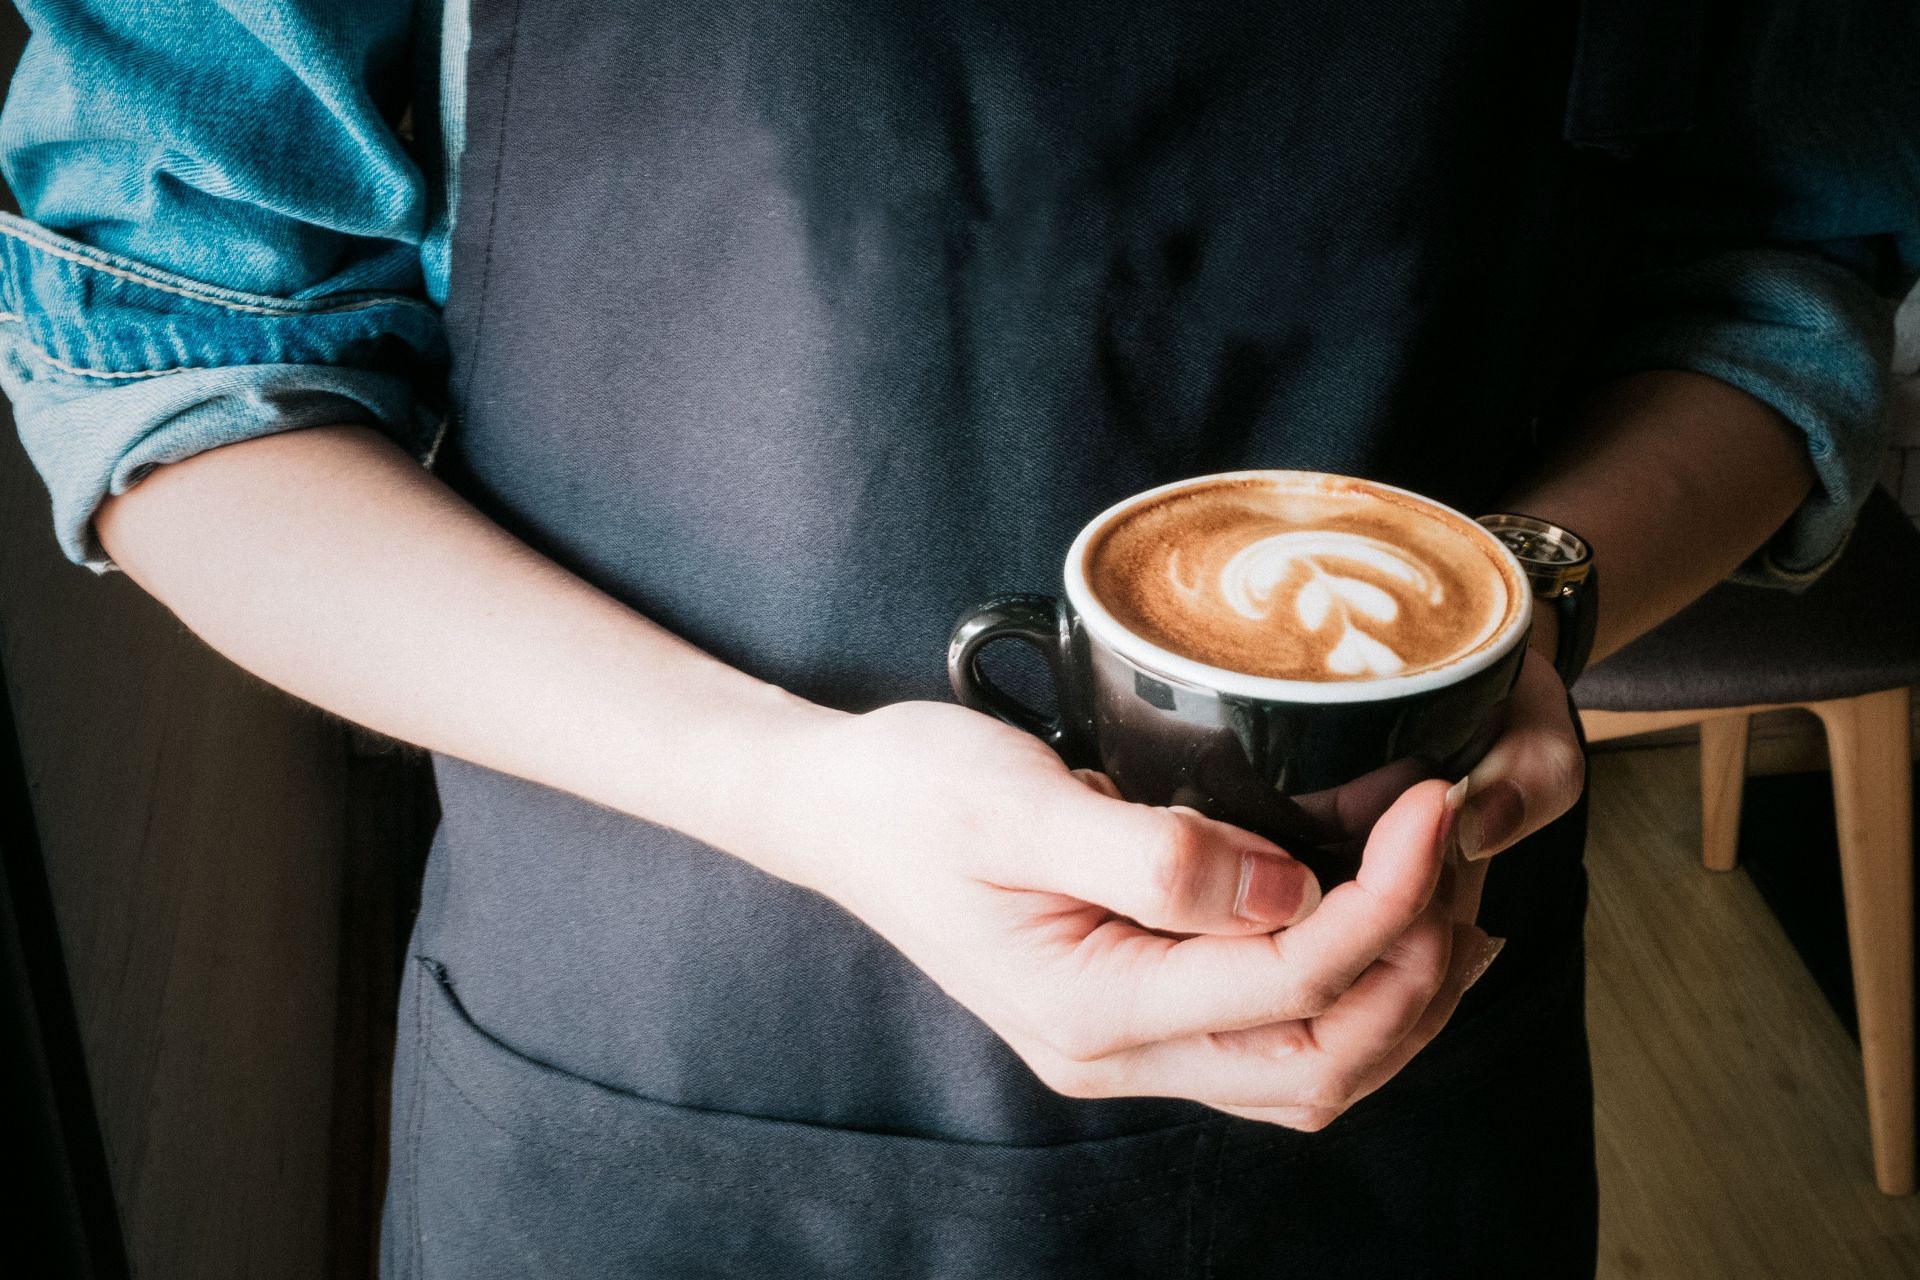 Coffee is one of the most popular beverages in the world. (Image via Pexels/ Porapak Apichodilok)